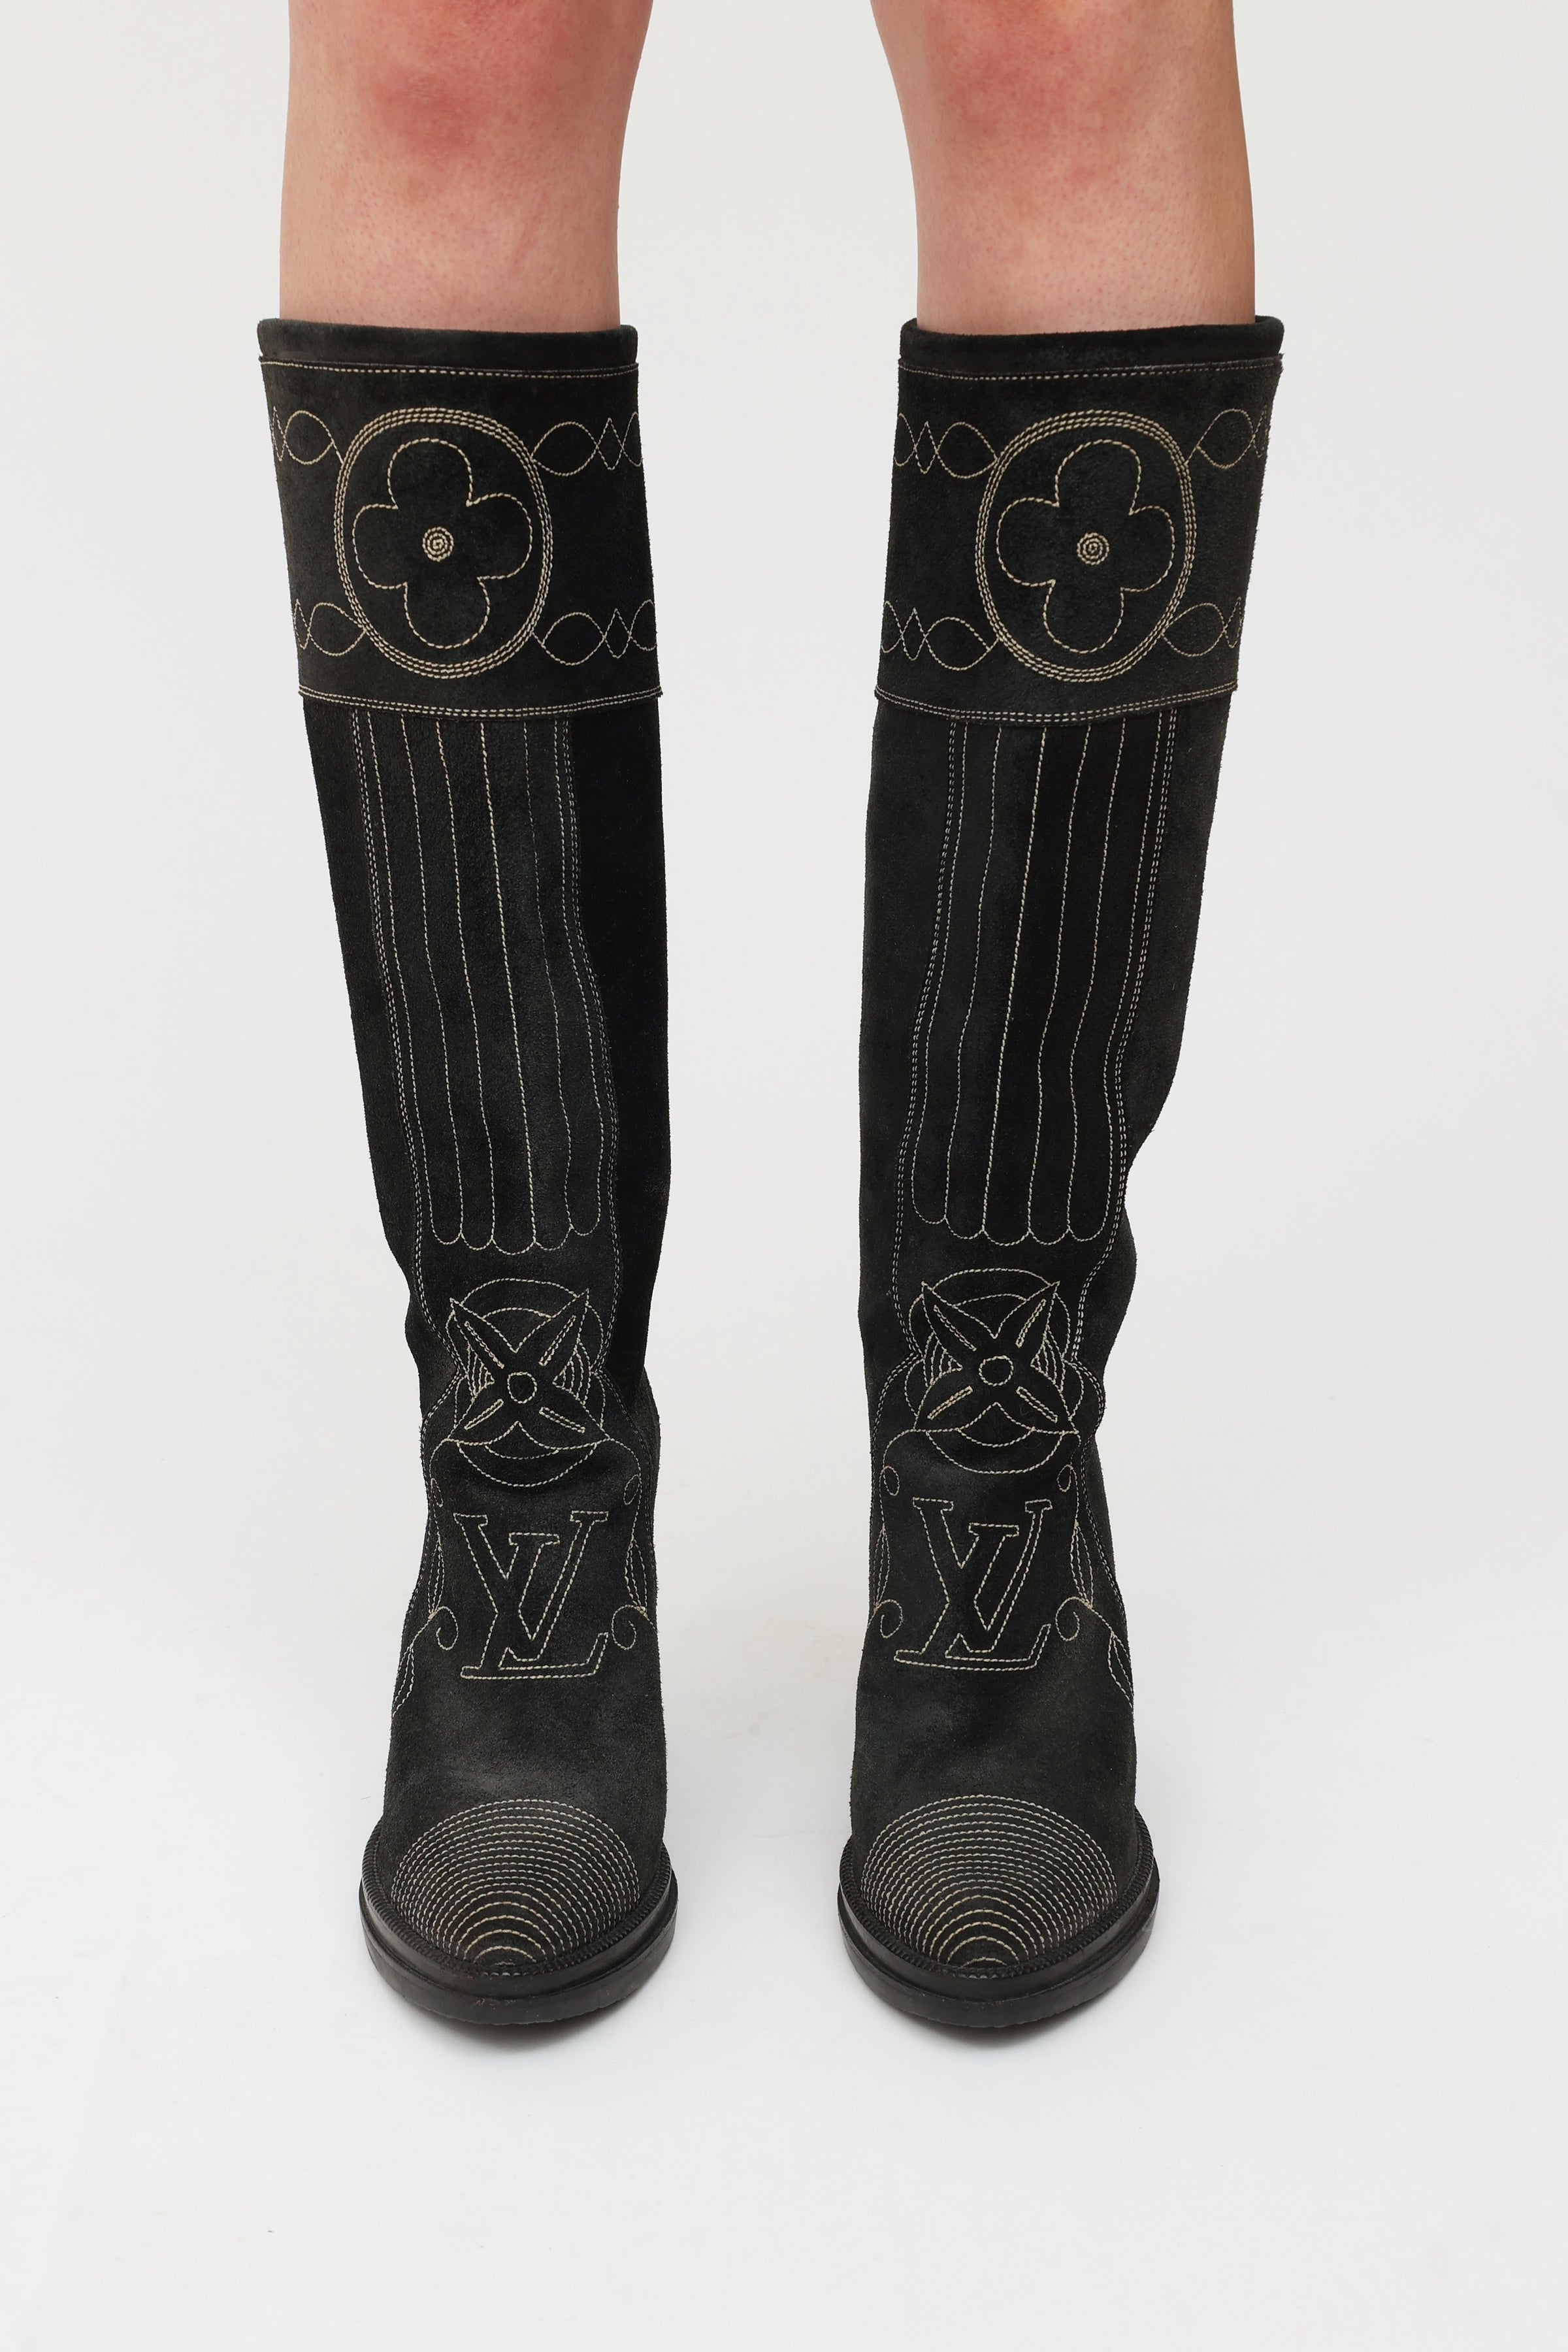 Louis Vuitton // Grey Suede Embroidered Western Boots – VSP